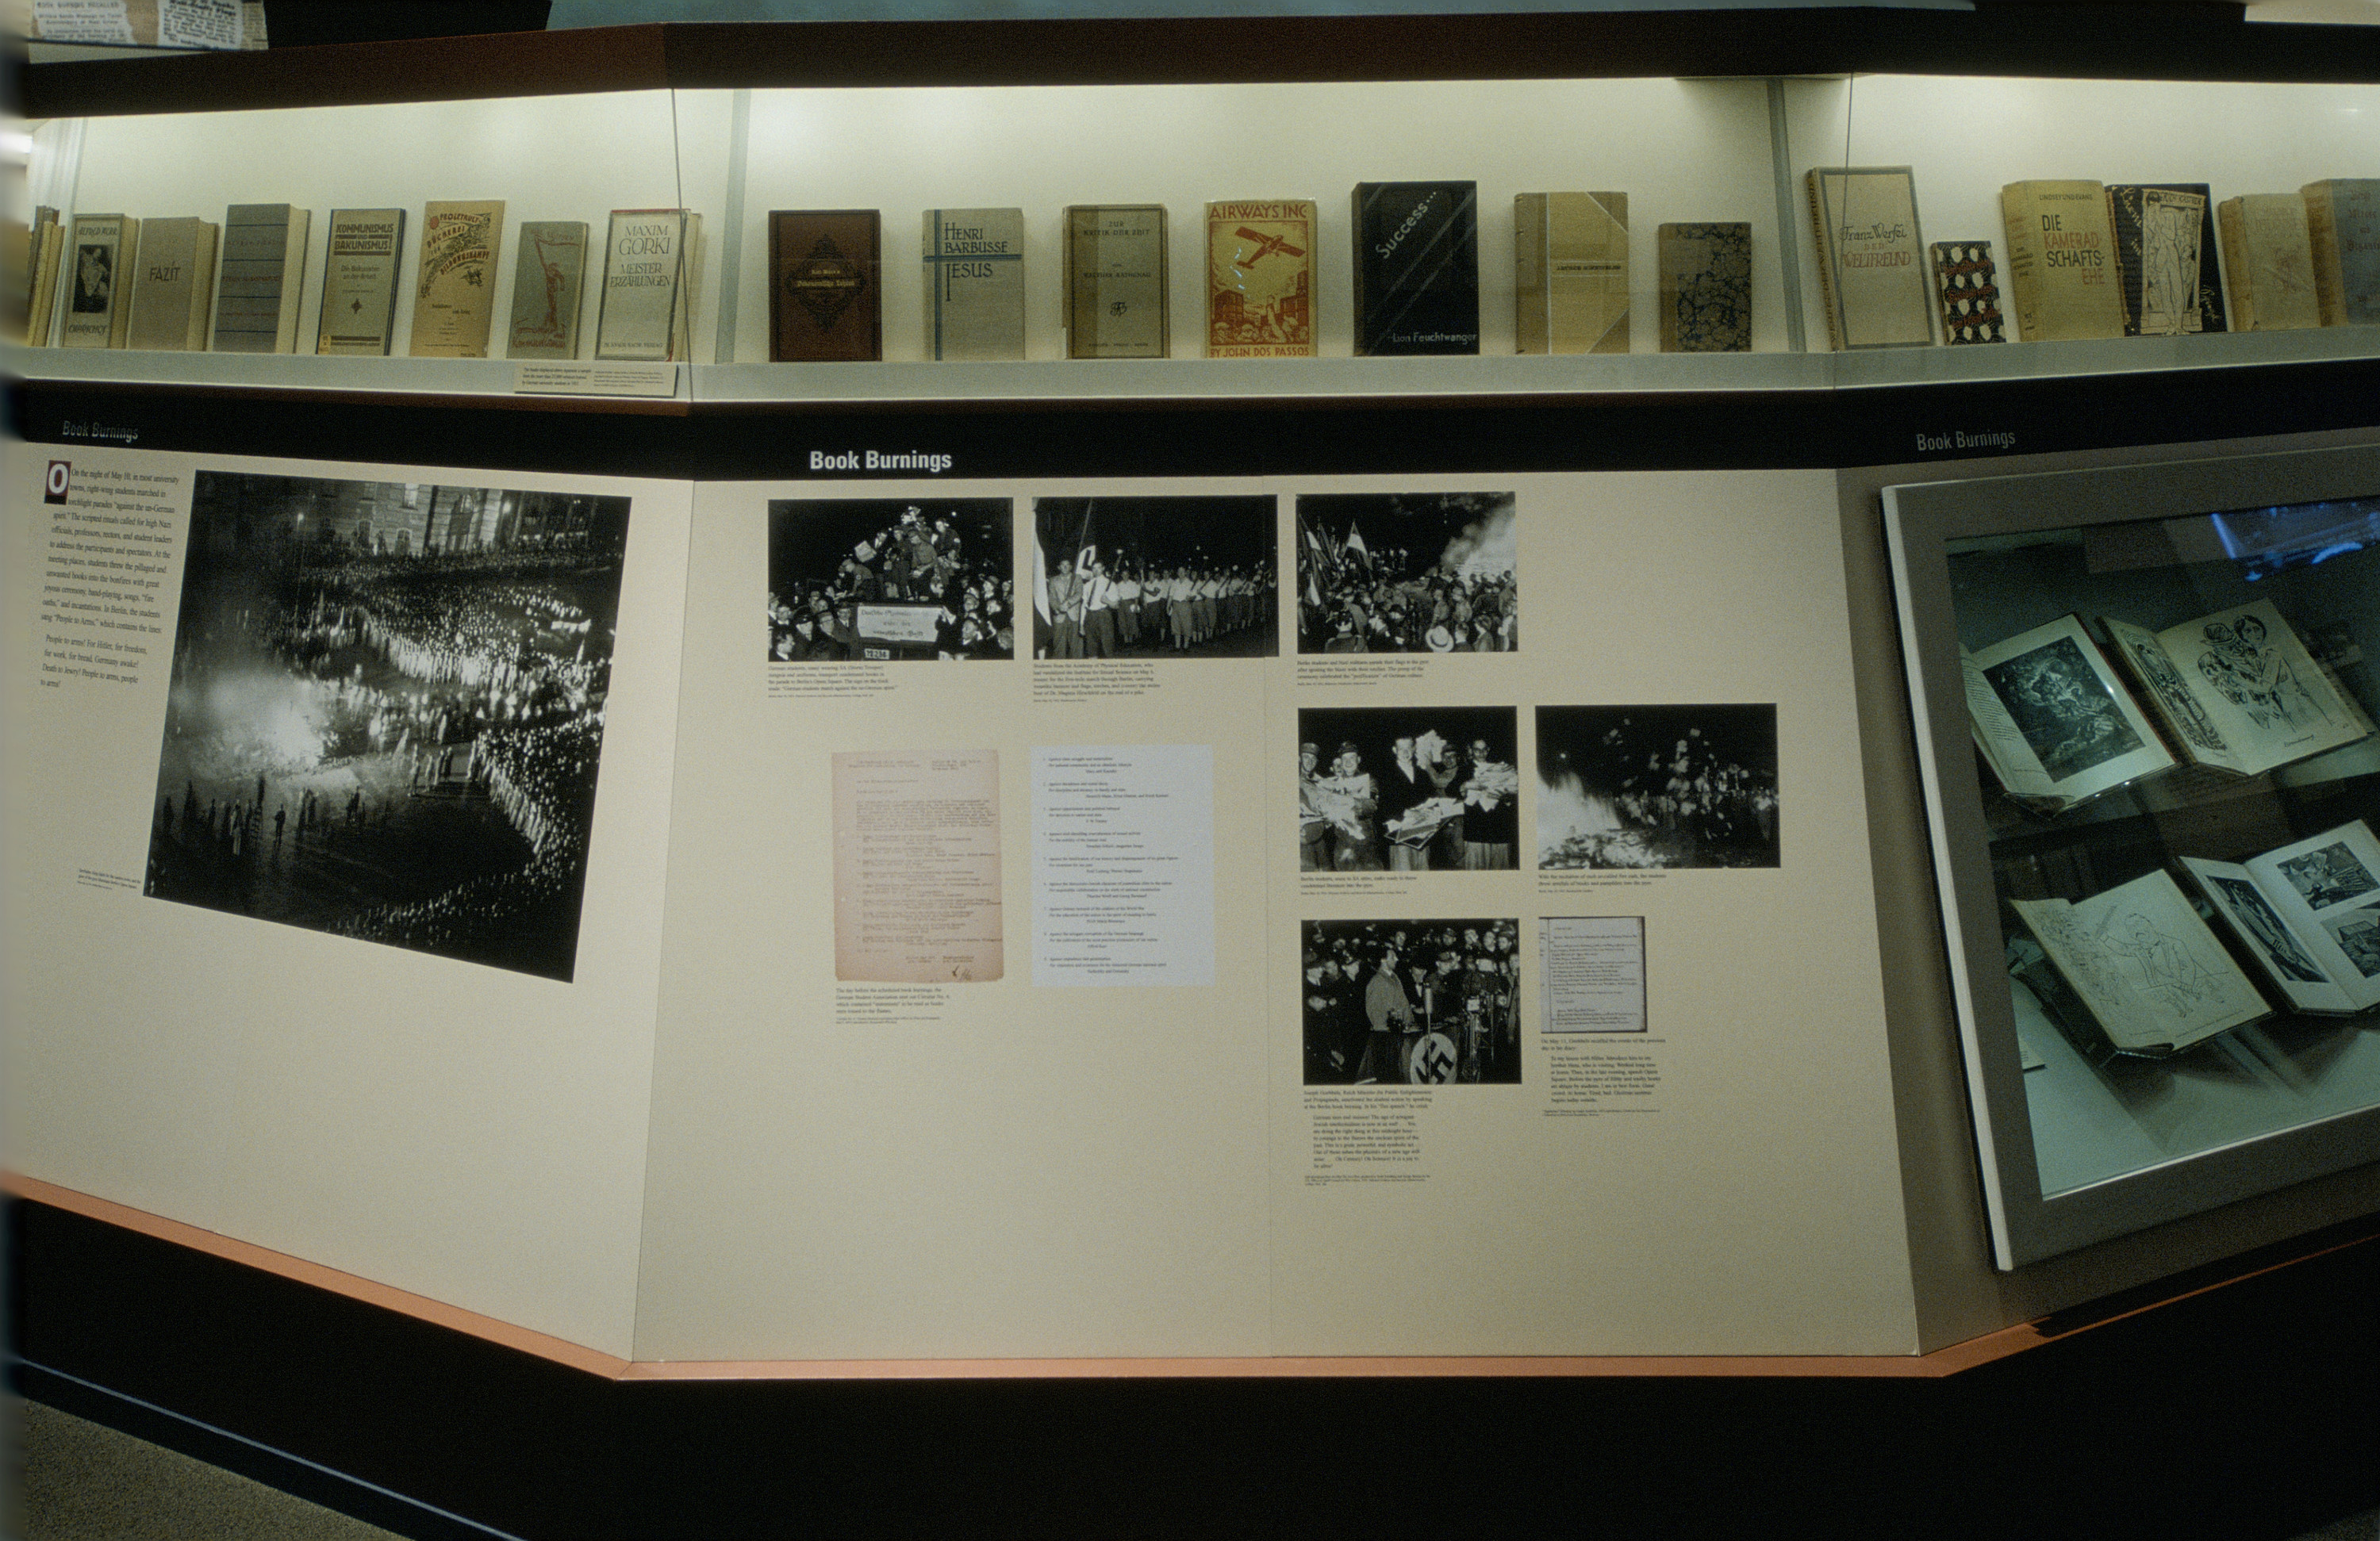 View of a panel of the Students in the Nazi Revolution section of the special exhibition "Fighting the Fires of Hate: America and the Nazi Book Burnings" (April 29 -- October 13, 2003), U.S. Holocaust Memorial Museum.